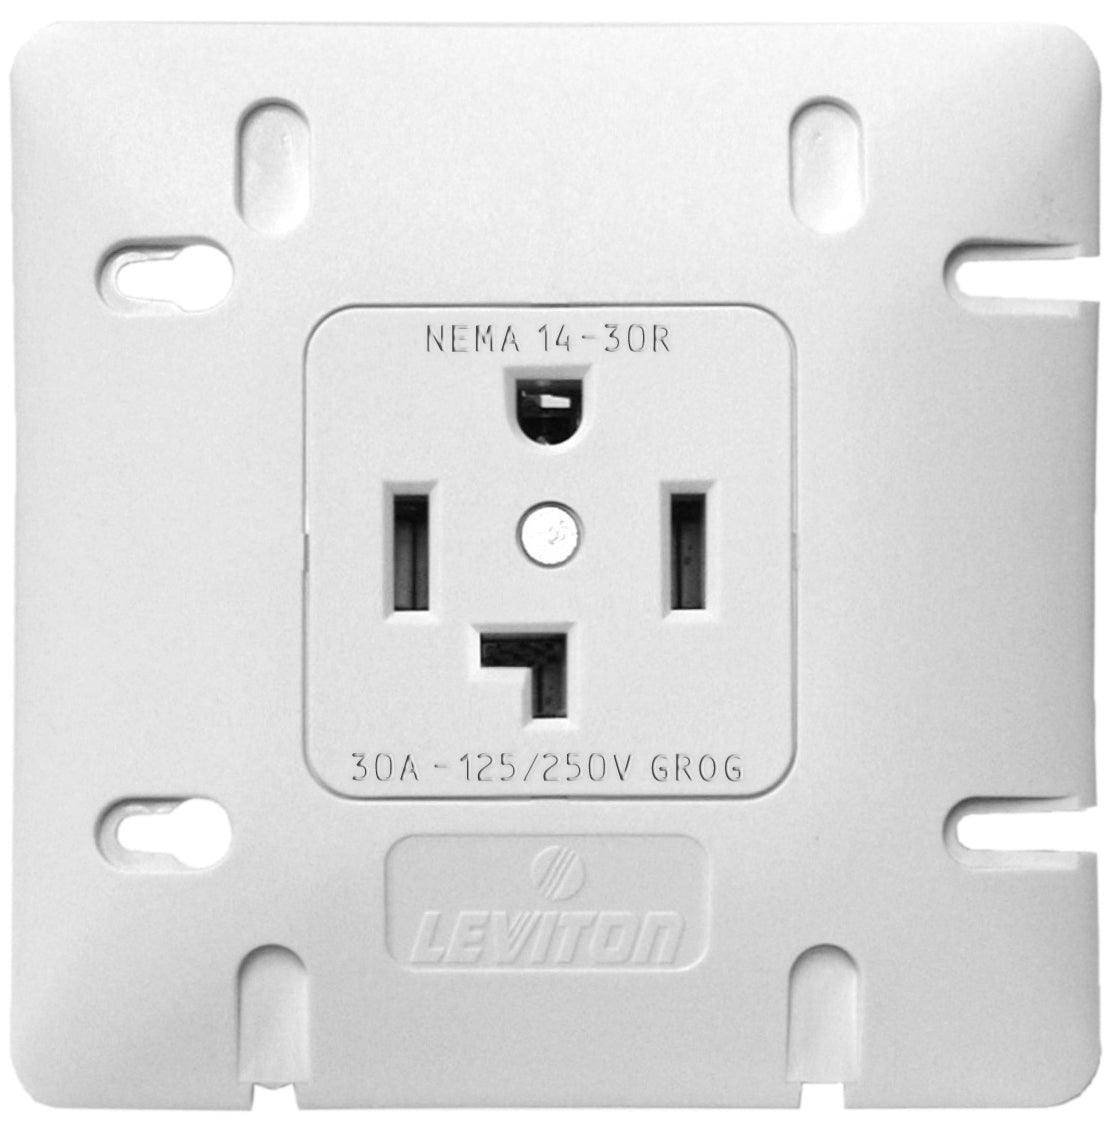 Leviton 30 Amp Dryer Receptacle Orka Reviews on